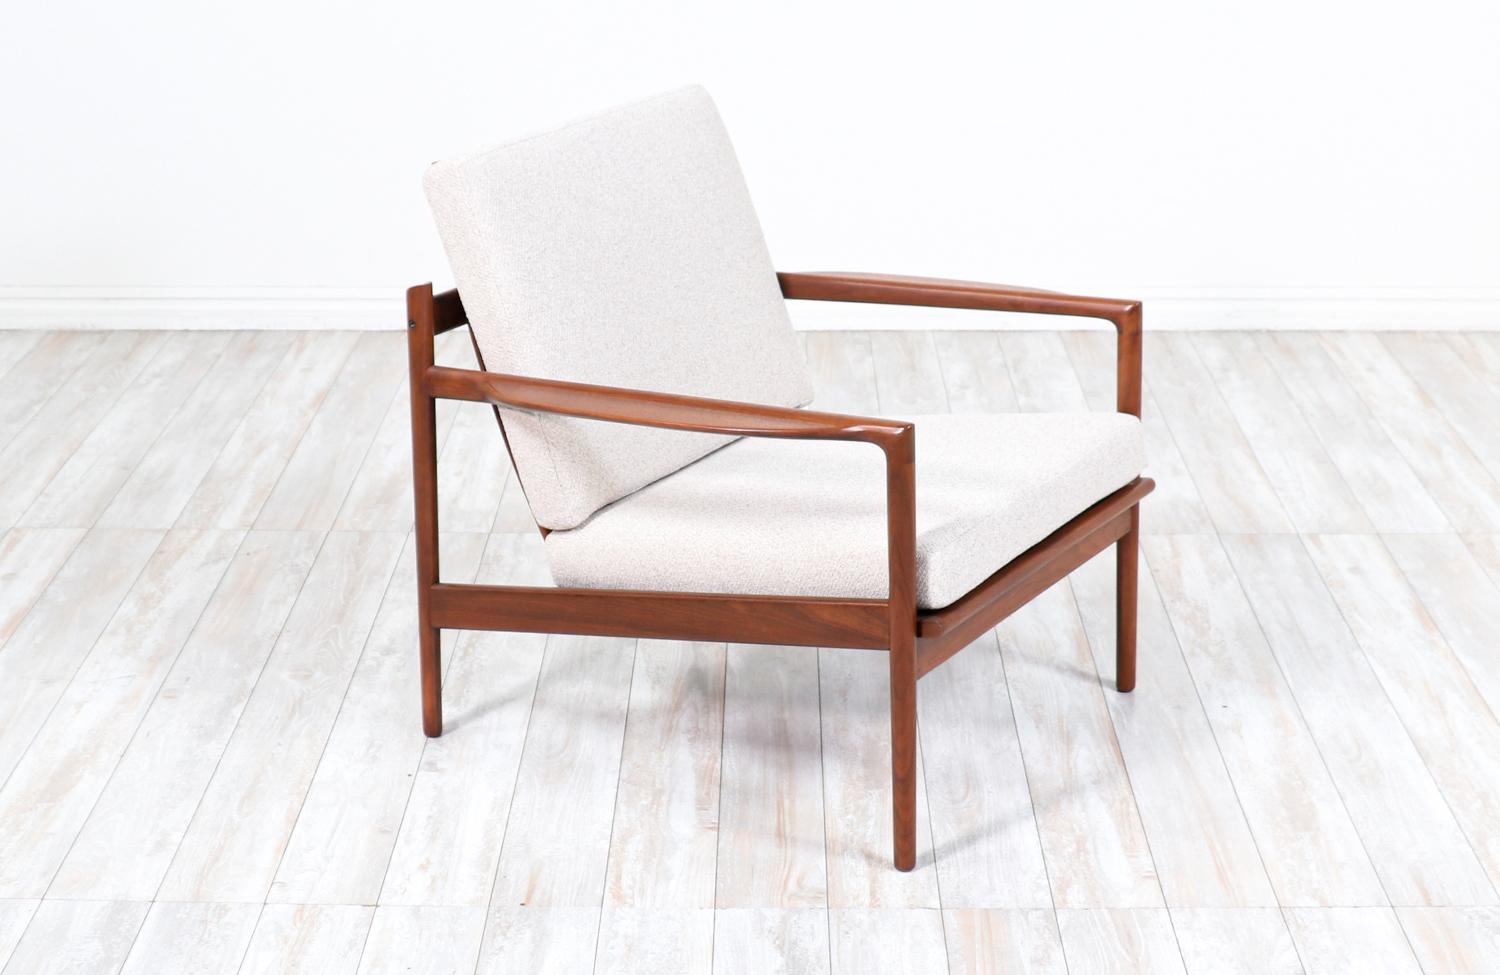 Stunning lounge chair designed by Ib Kofod-Larsen for Selig in Denmark circa 1960’s. This distinctive Danish modern design features a solid walnut wood frame with four large slats acting as the back rest plus comfortable, carved armrests. The